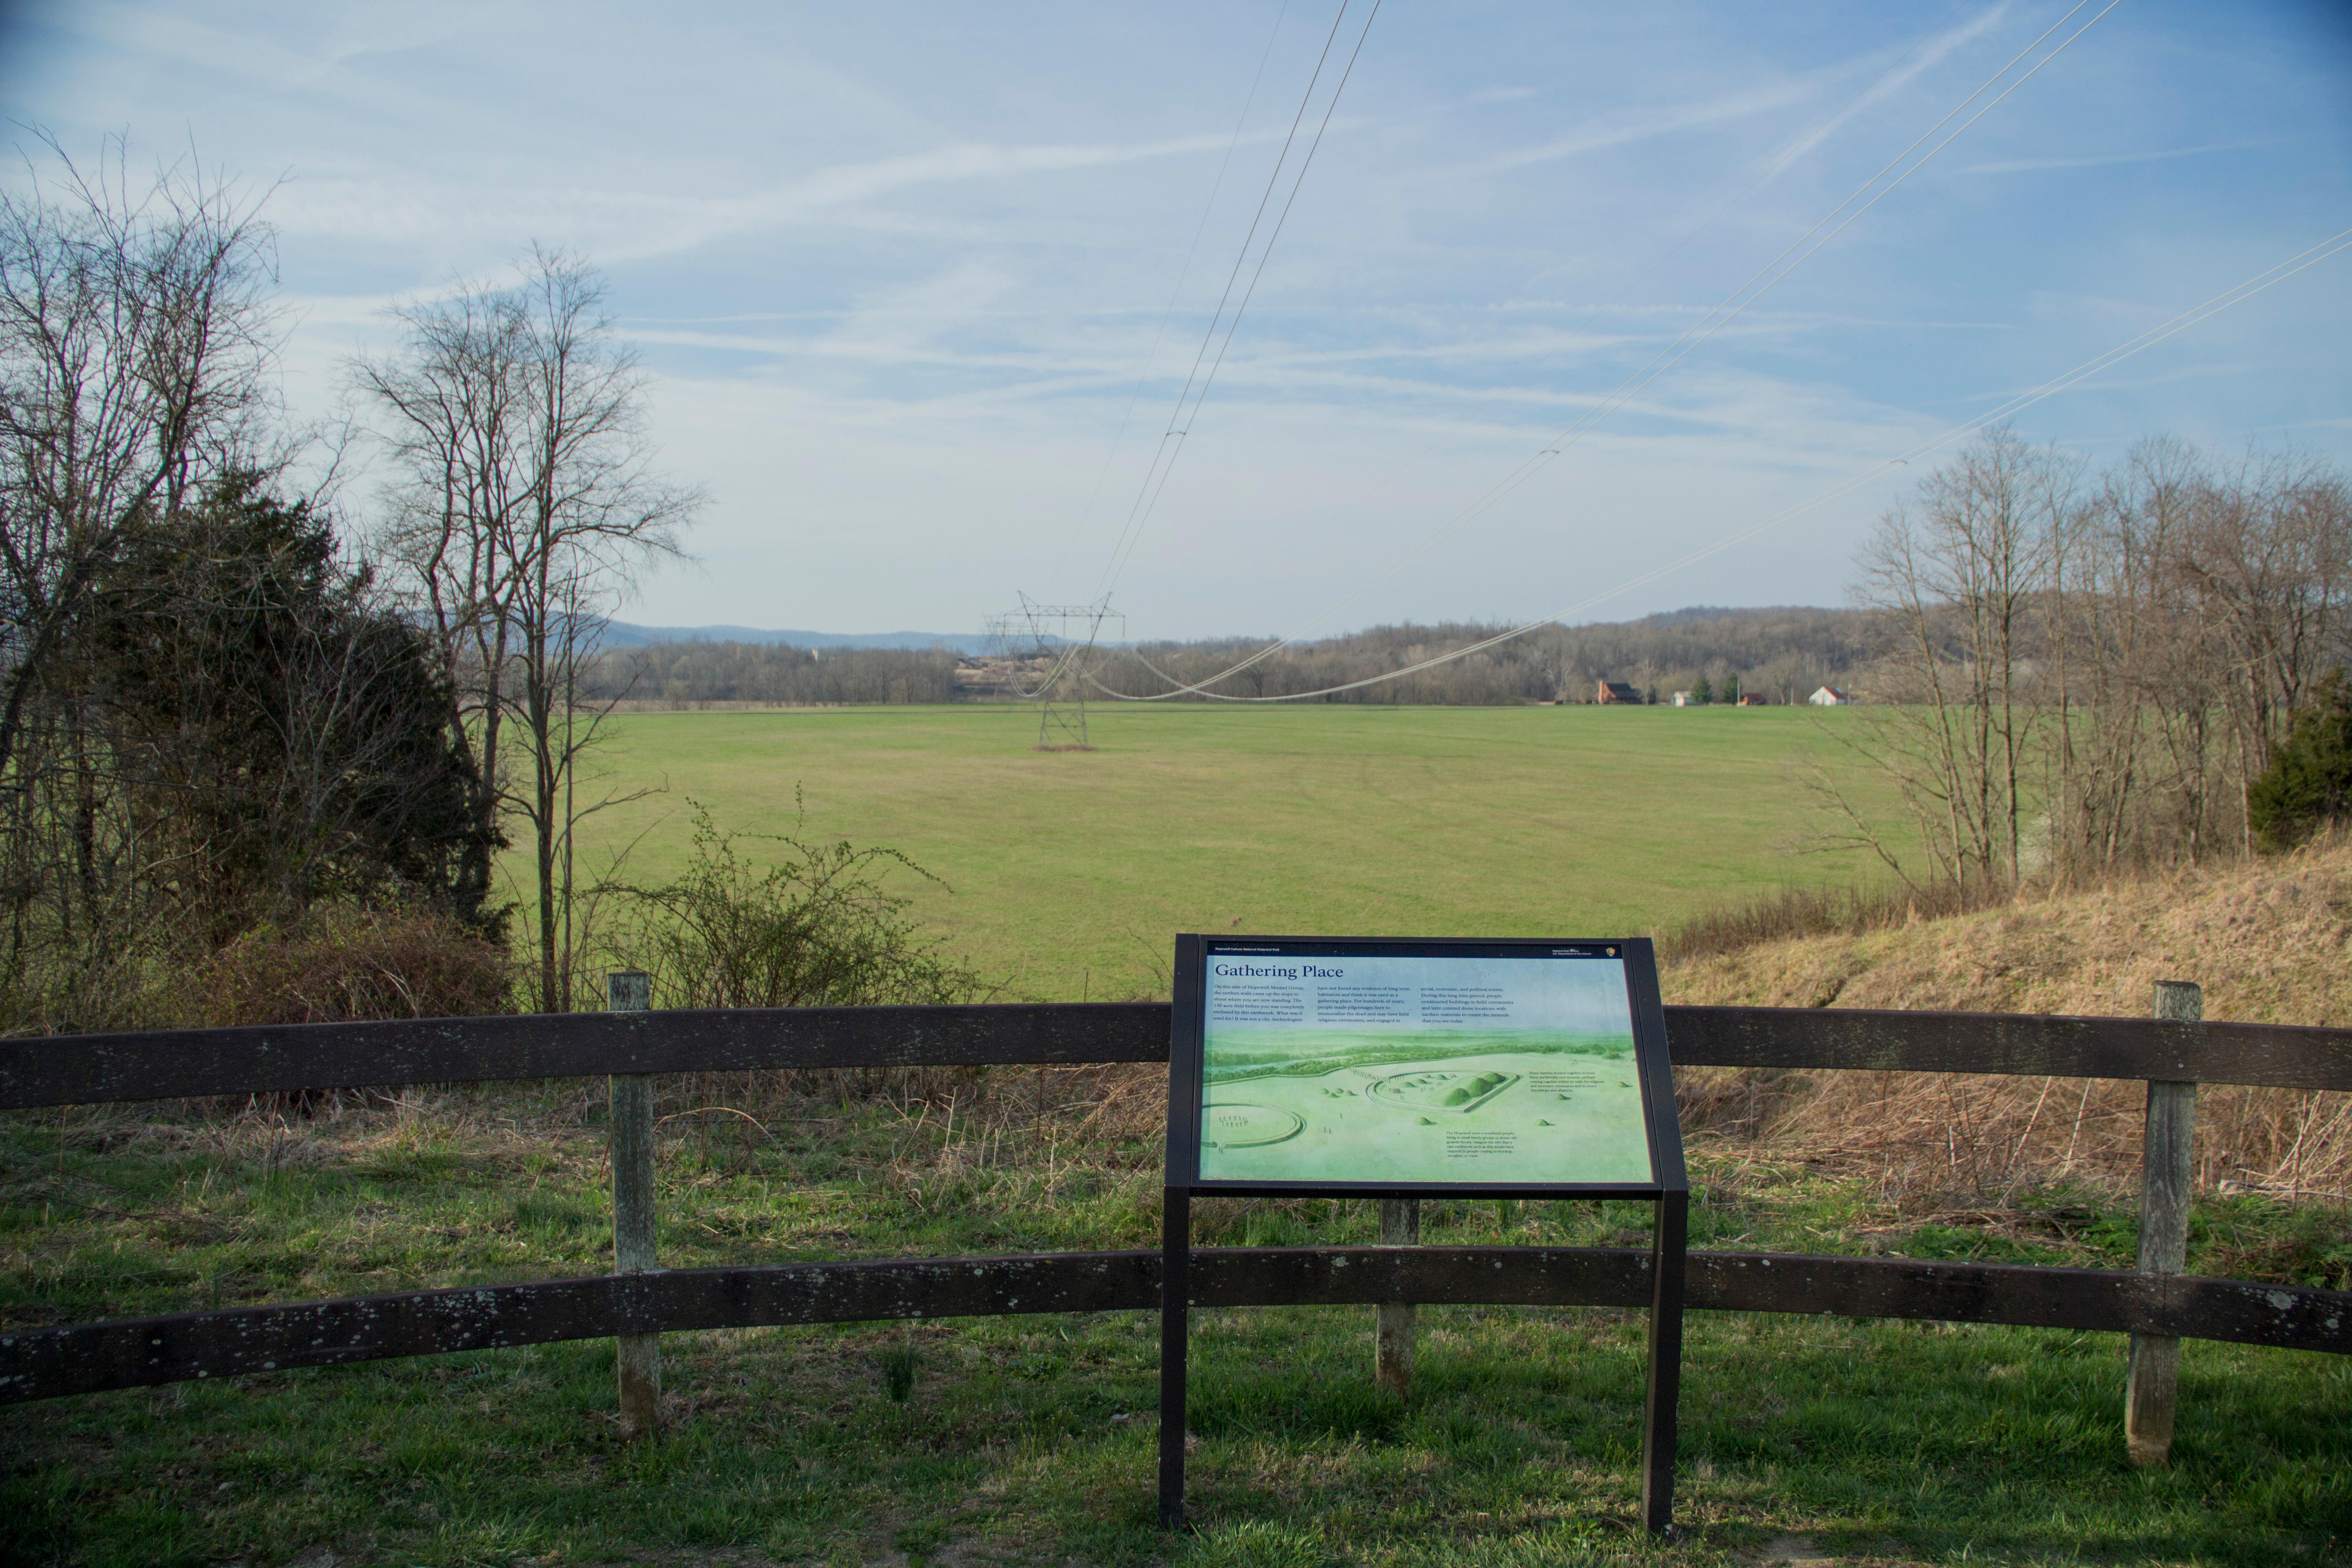 An overlook area showing a green grassy field with a panel showing artwork and text